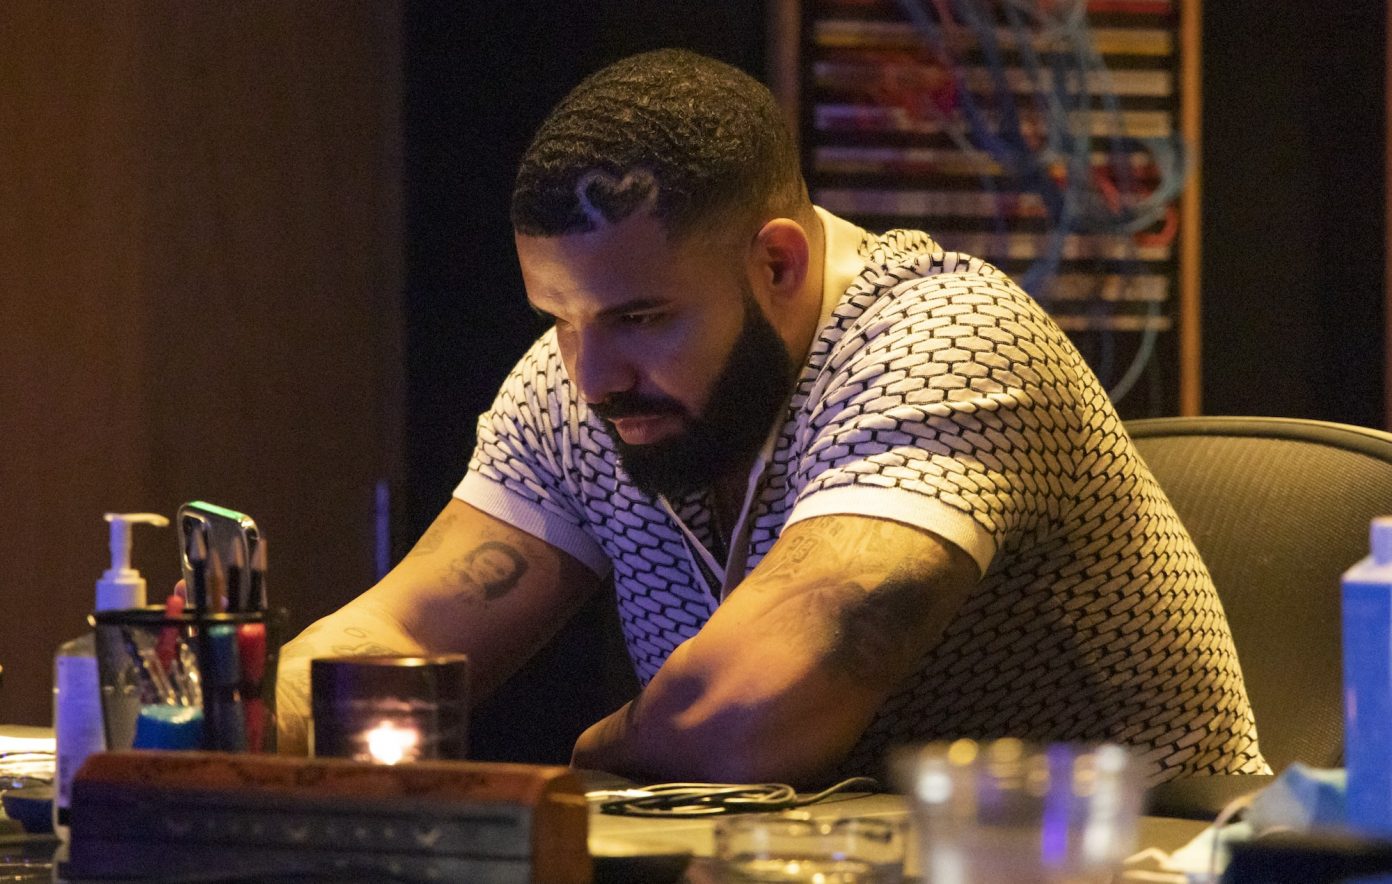 Drake’s new album ‘Certified Lover Boy’ continues to dominate the charts